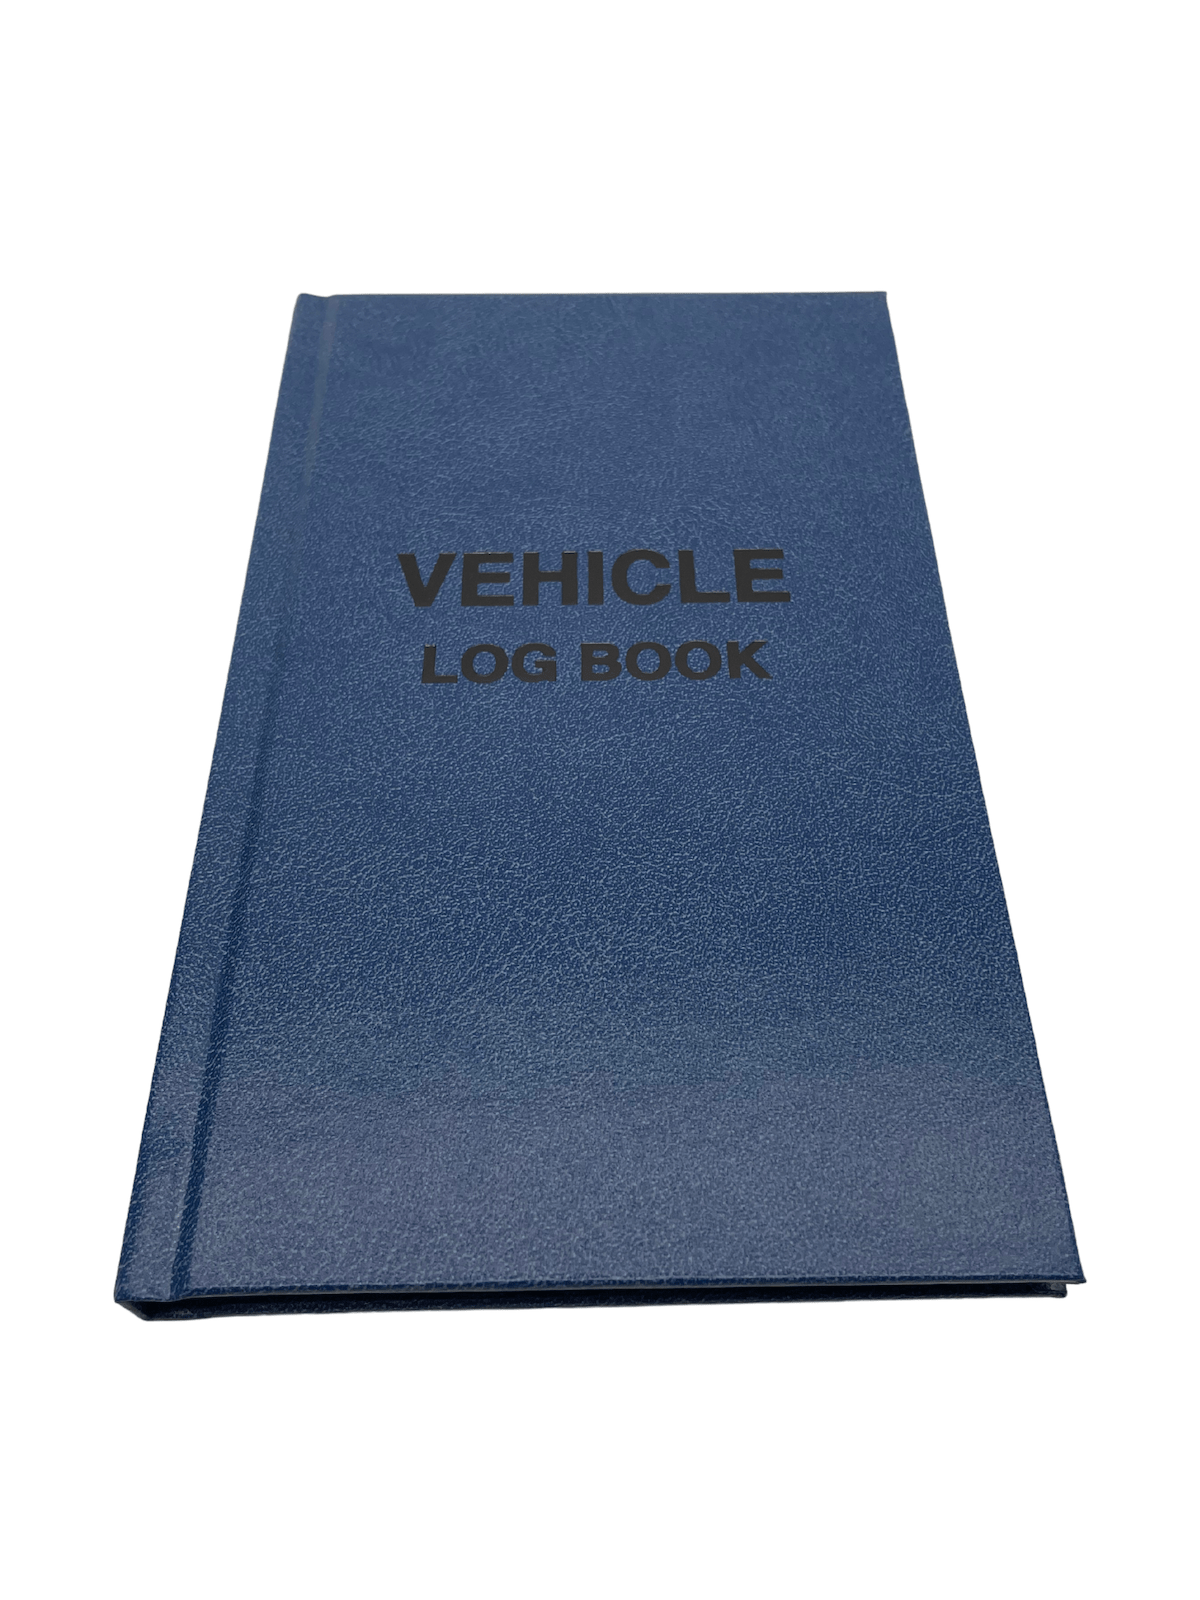 a blue log book with black text stating "vehicle log book"